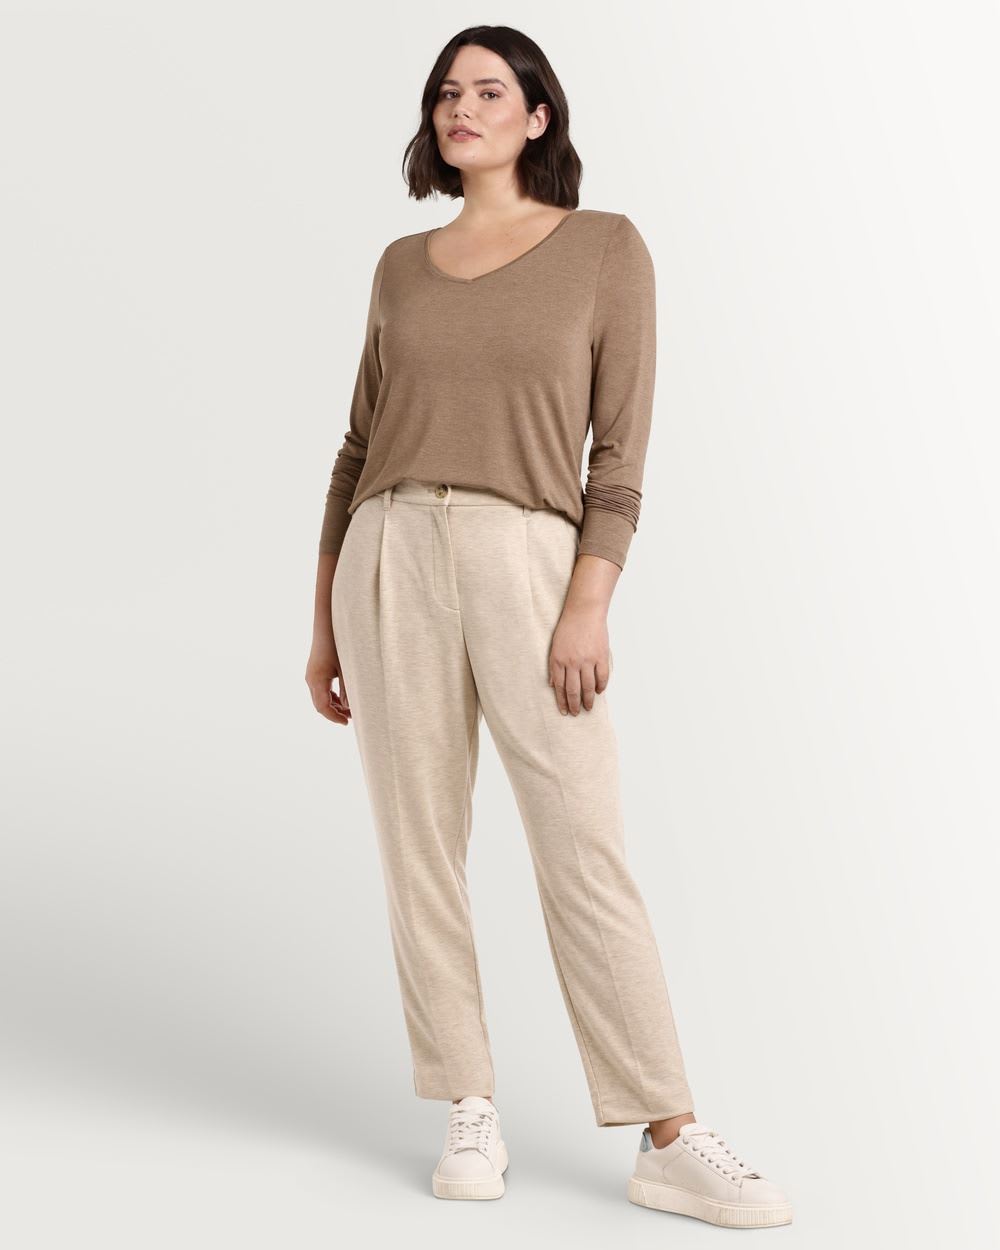 Textured Tapered Leg Modern Stretch Trousers